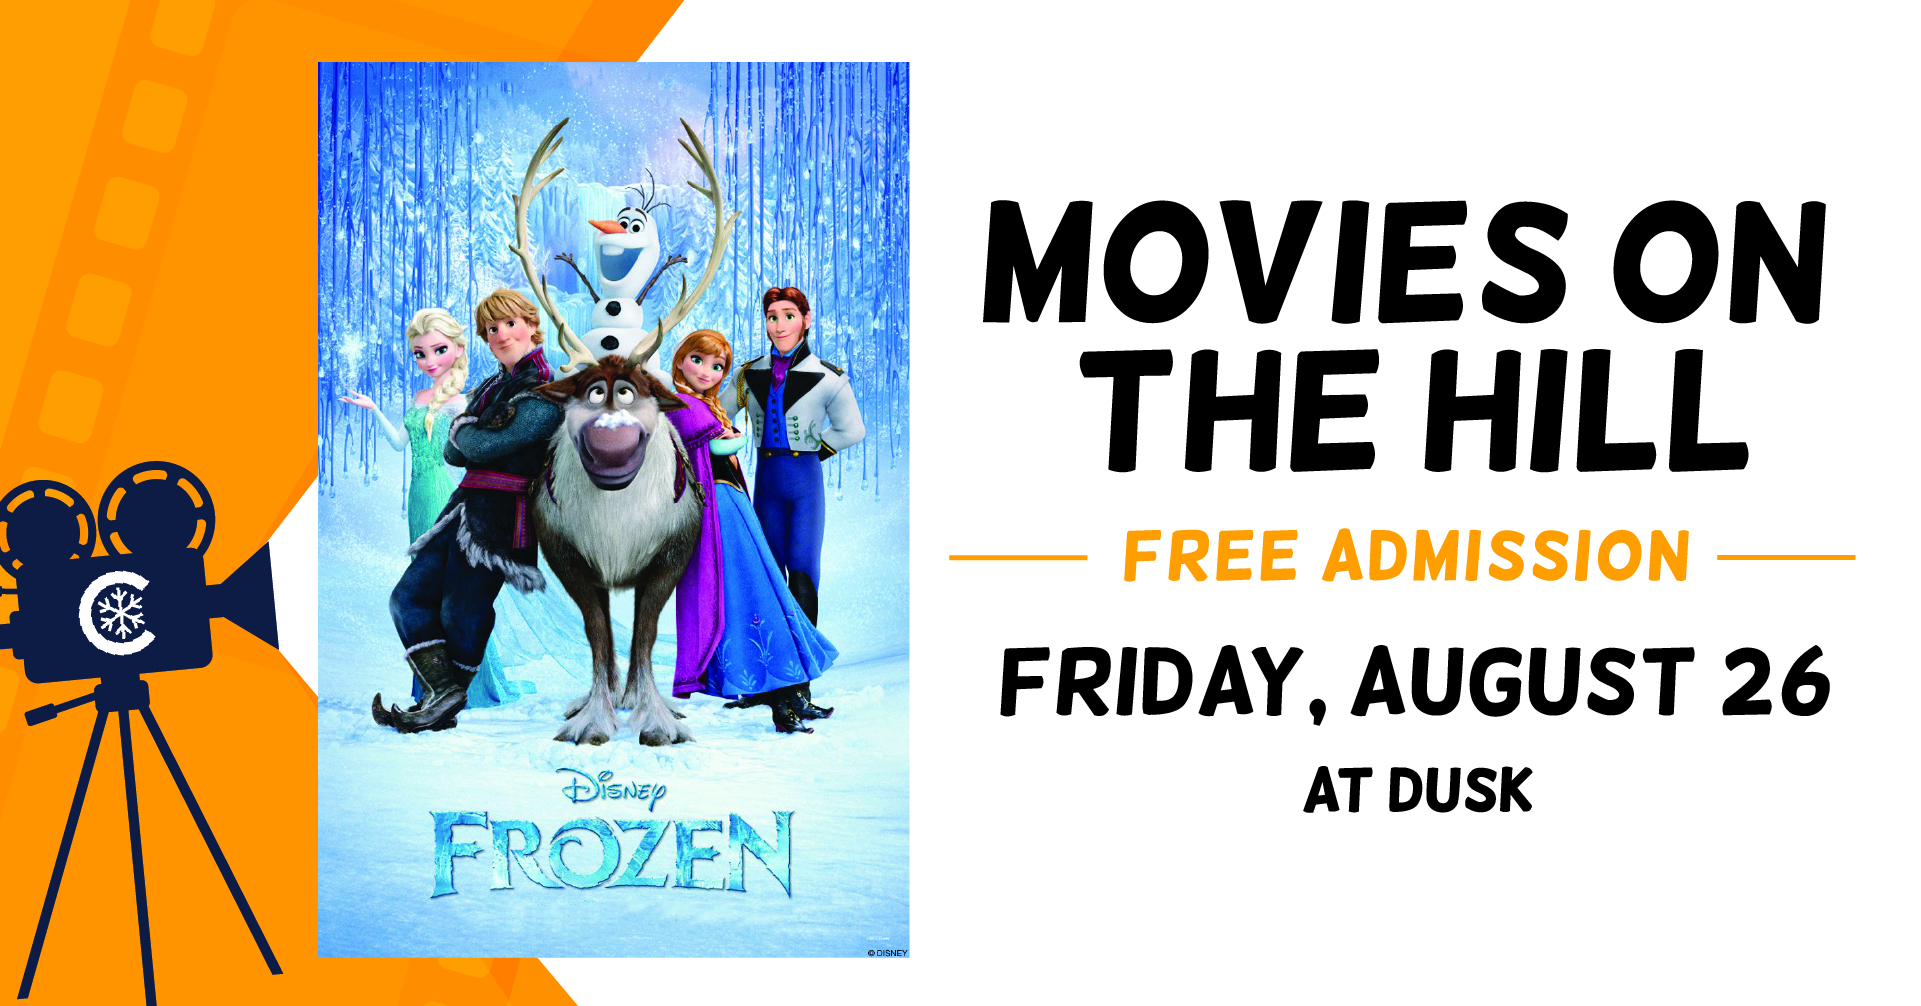 MoviesOnTheHill_Frozen_FB_event